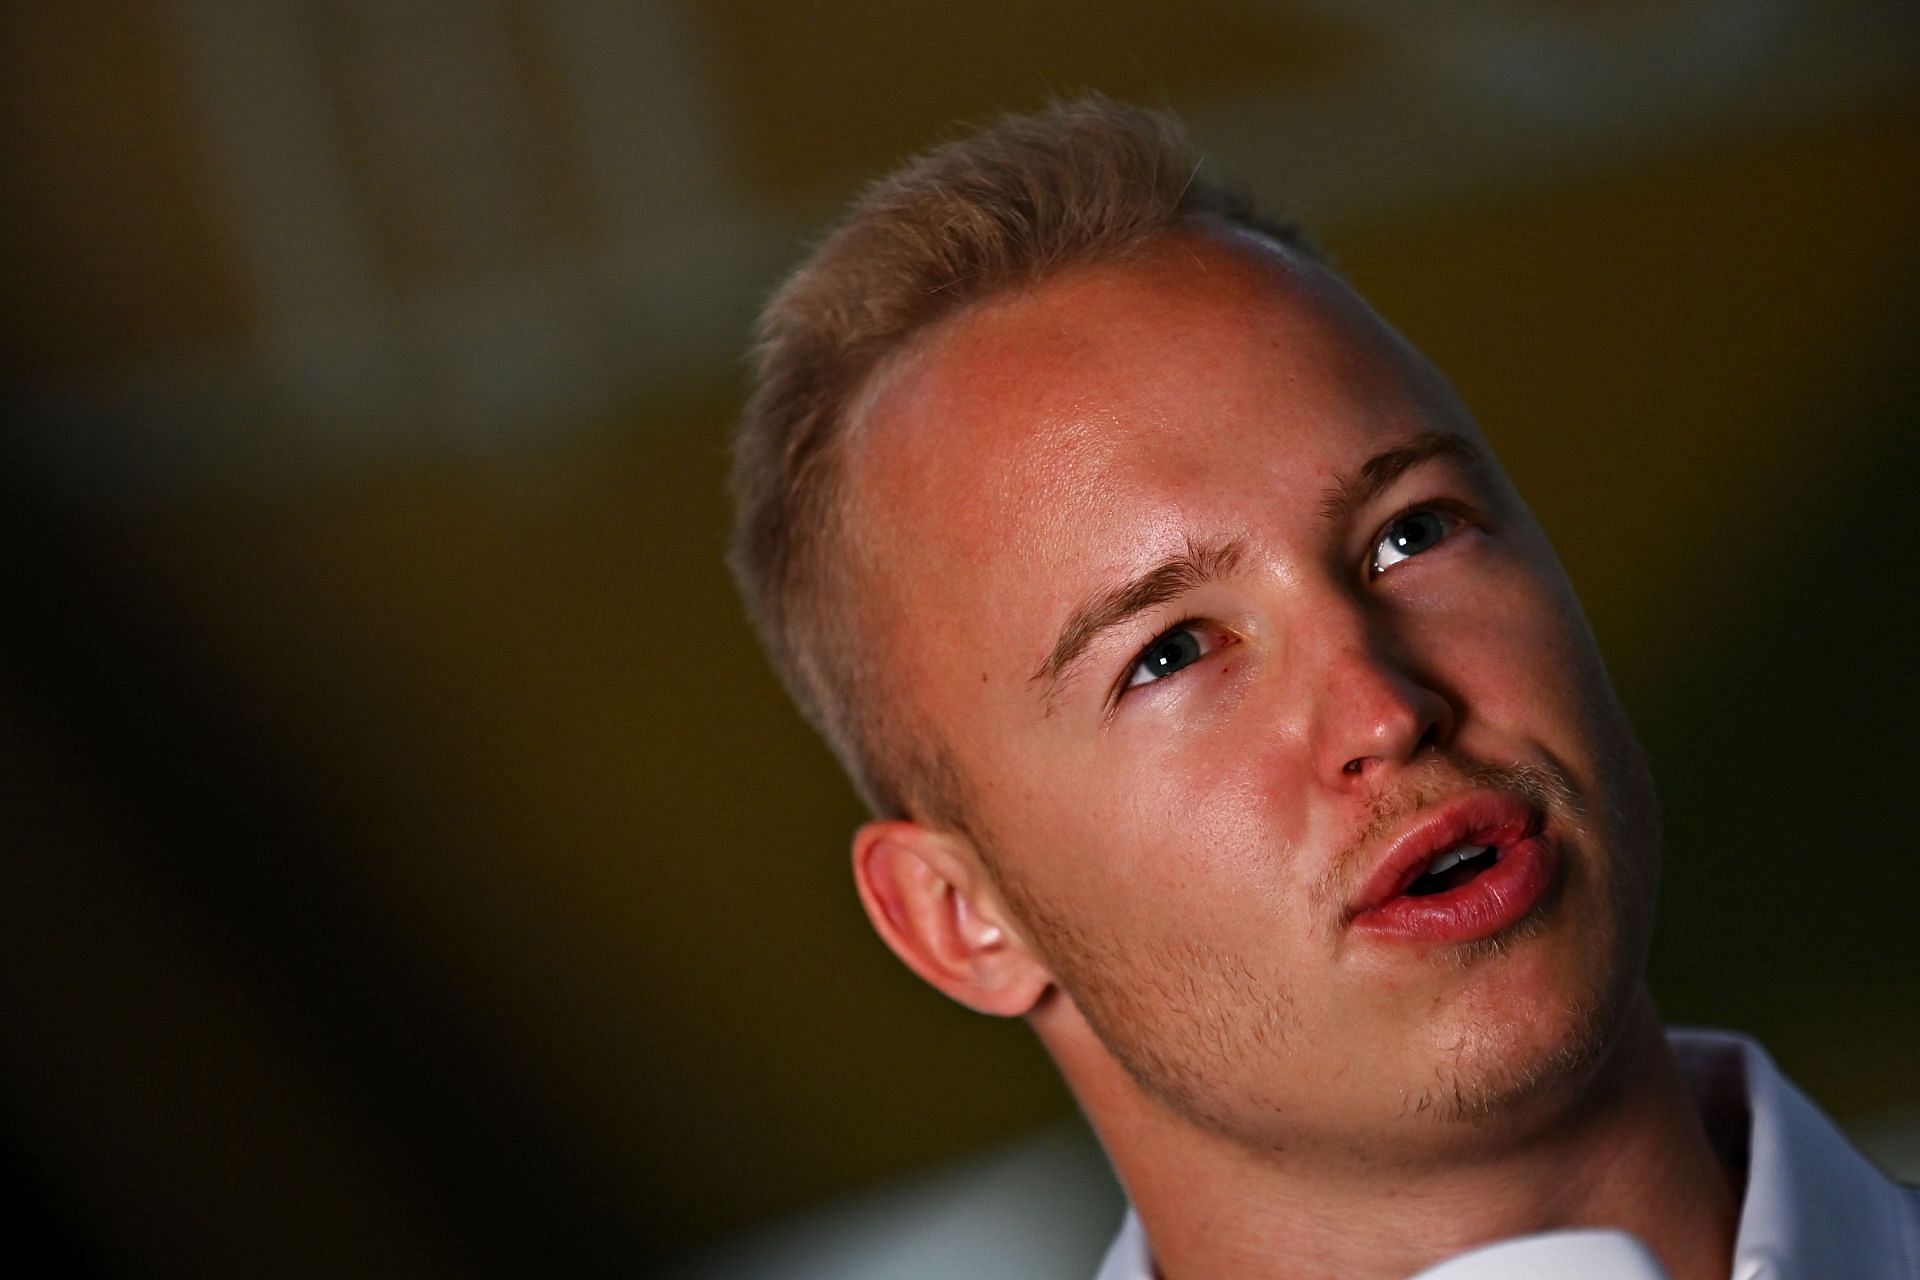 Nikita Mazepin in the F1 paddock in Doha, Qatar (Photo by Clive Mason/Getty Images